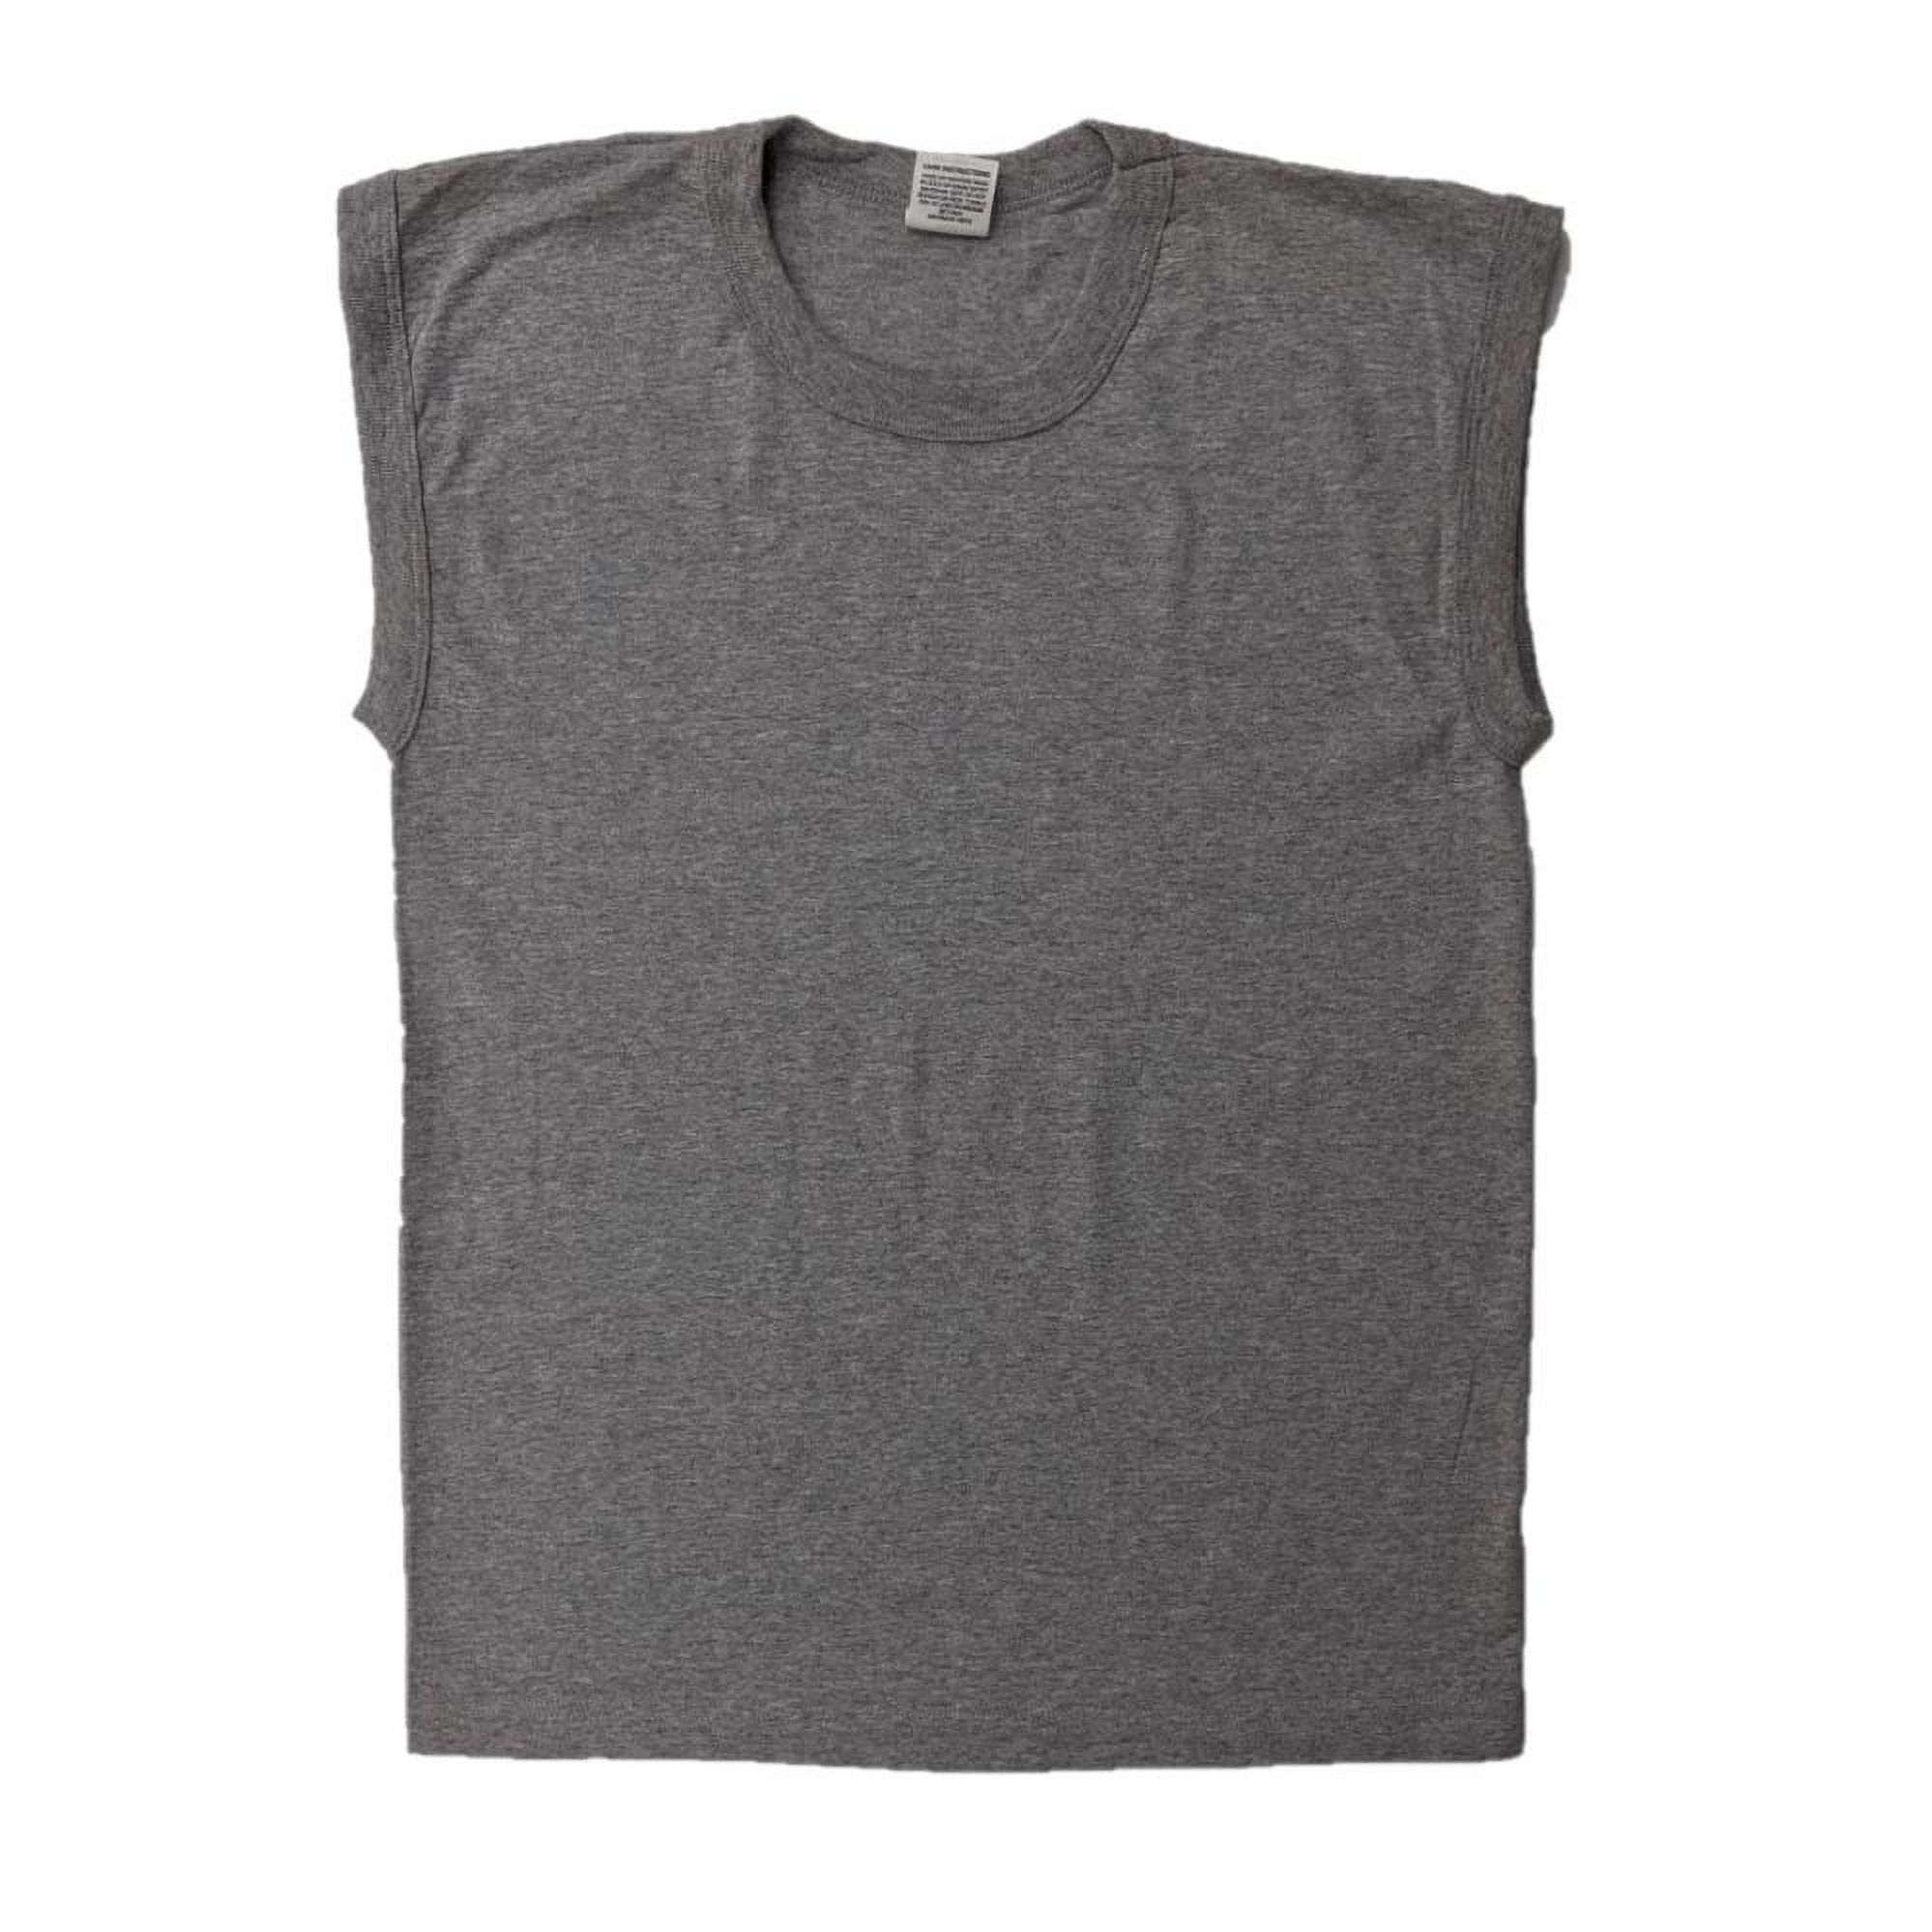 McGuire Gear Men's Muscle T-shirt, Made in USA Summer, Gym, and Workout Apparel - image 2 of 2